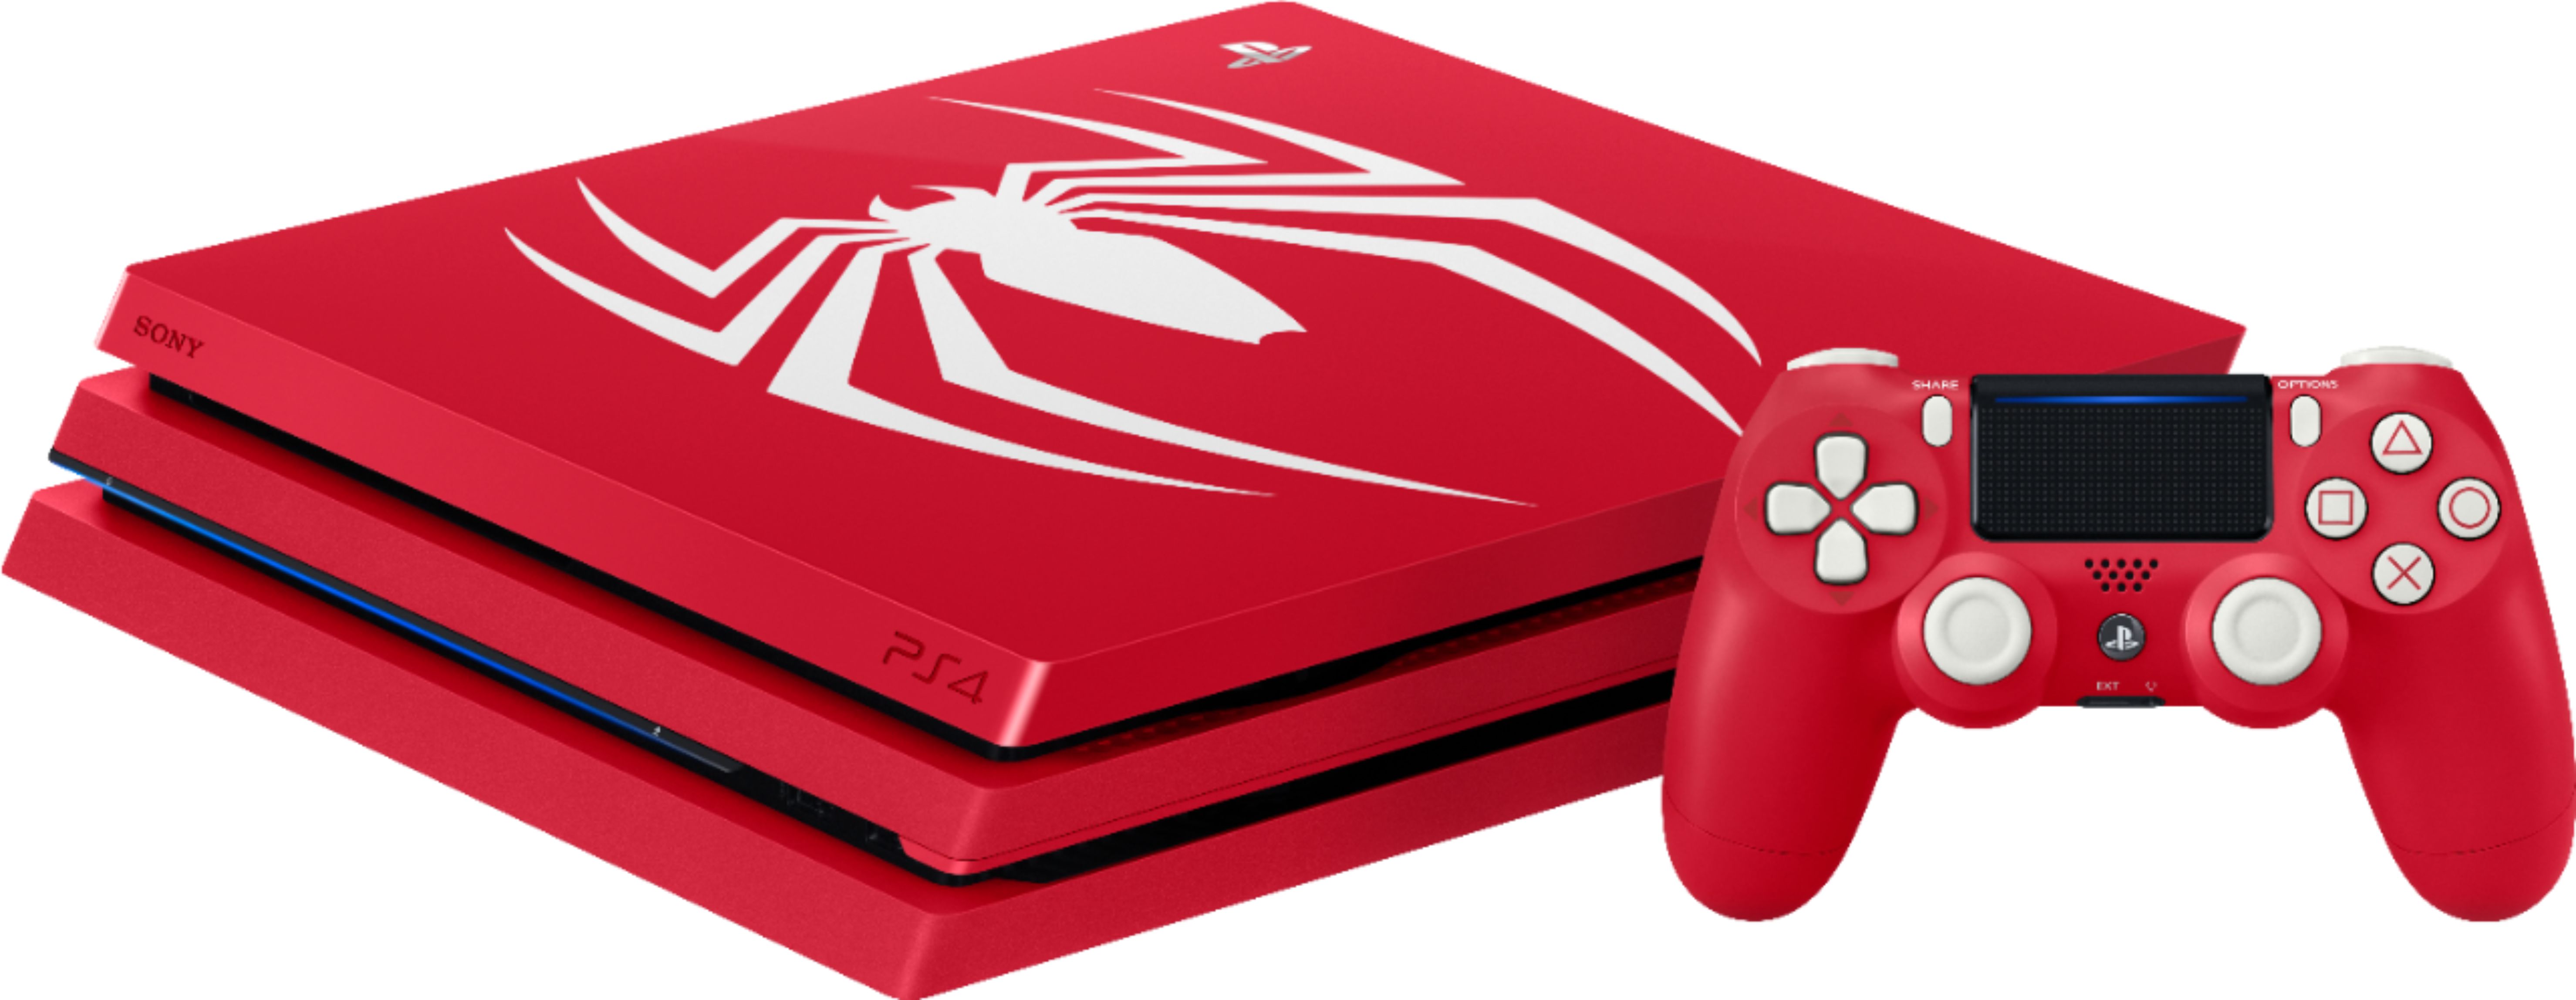 ps4 and spiderman bundle